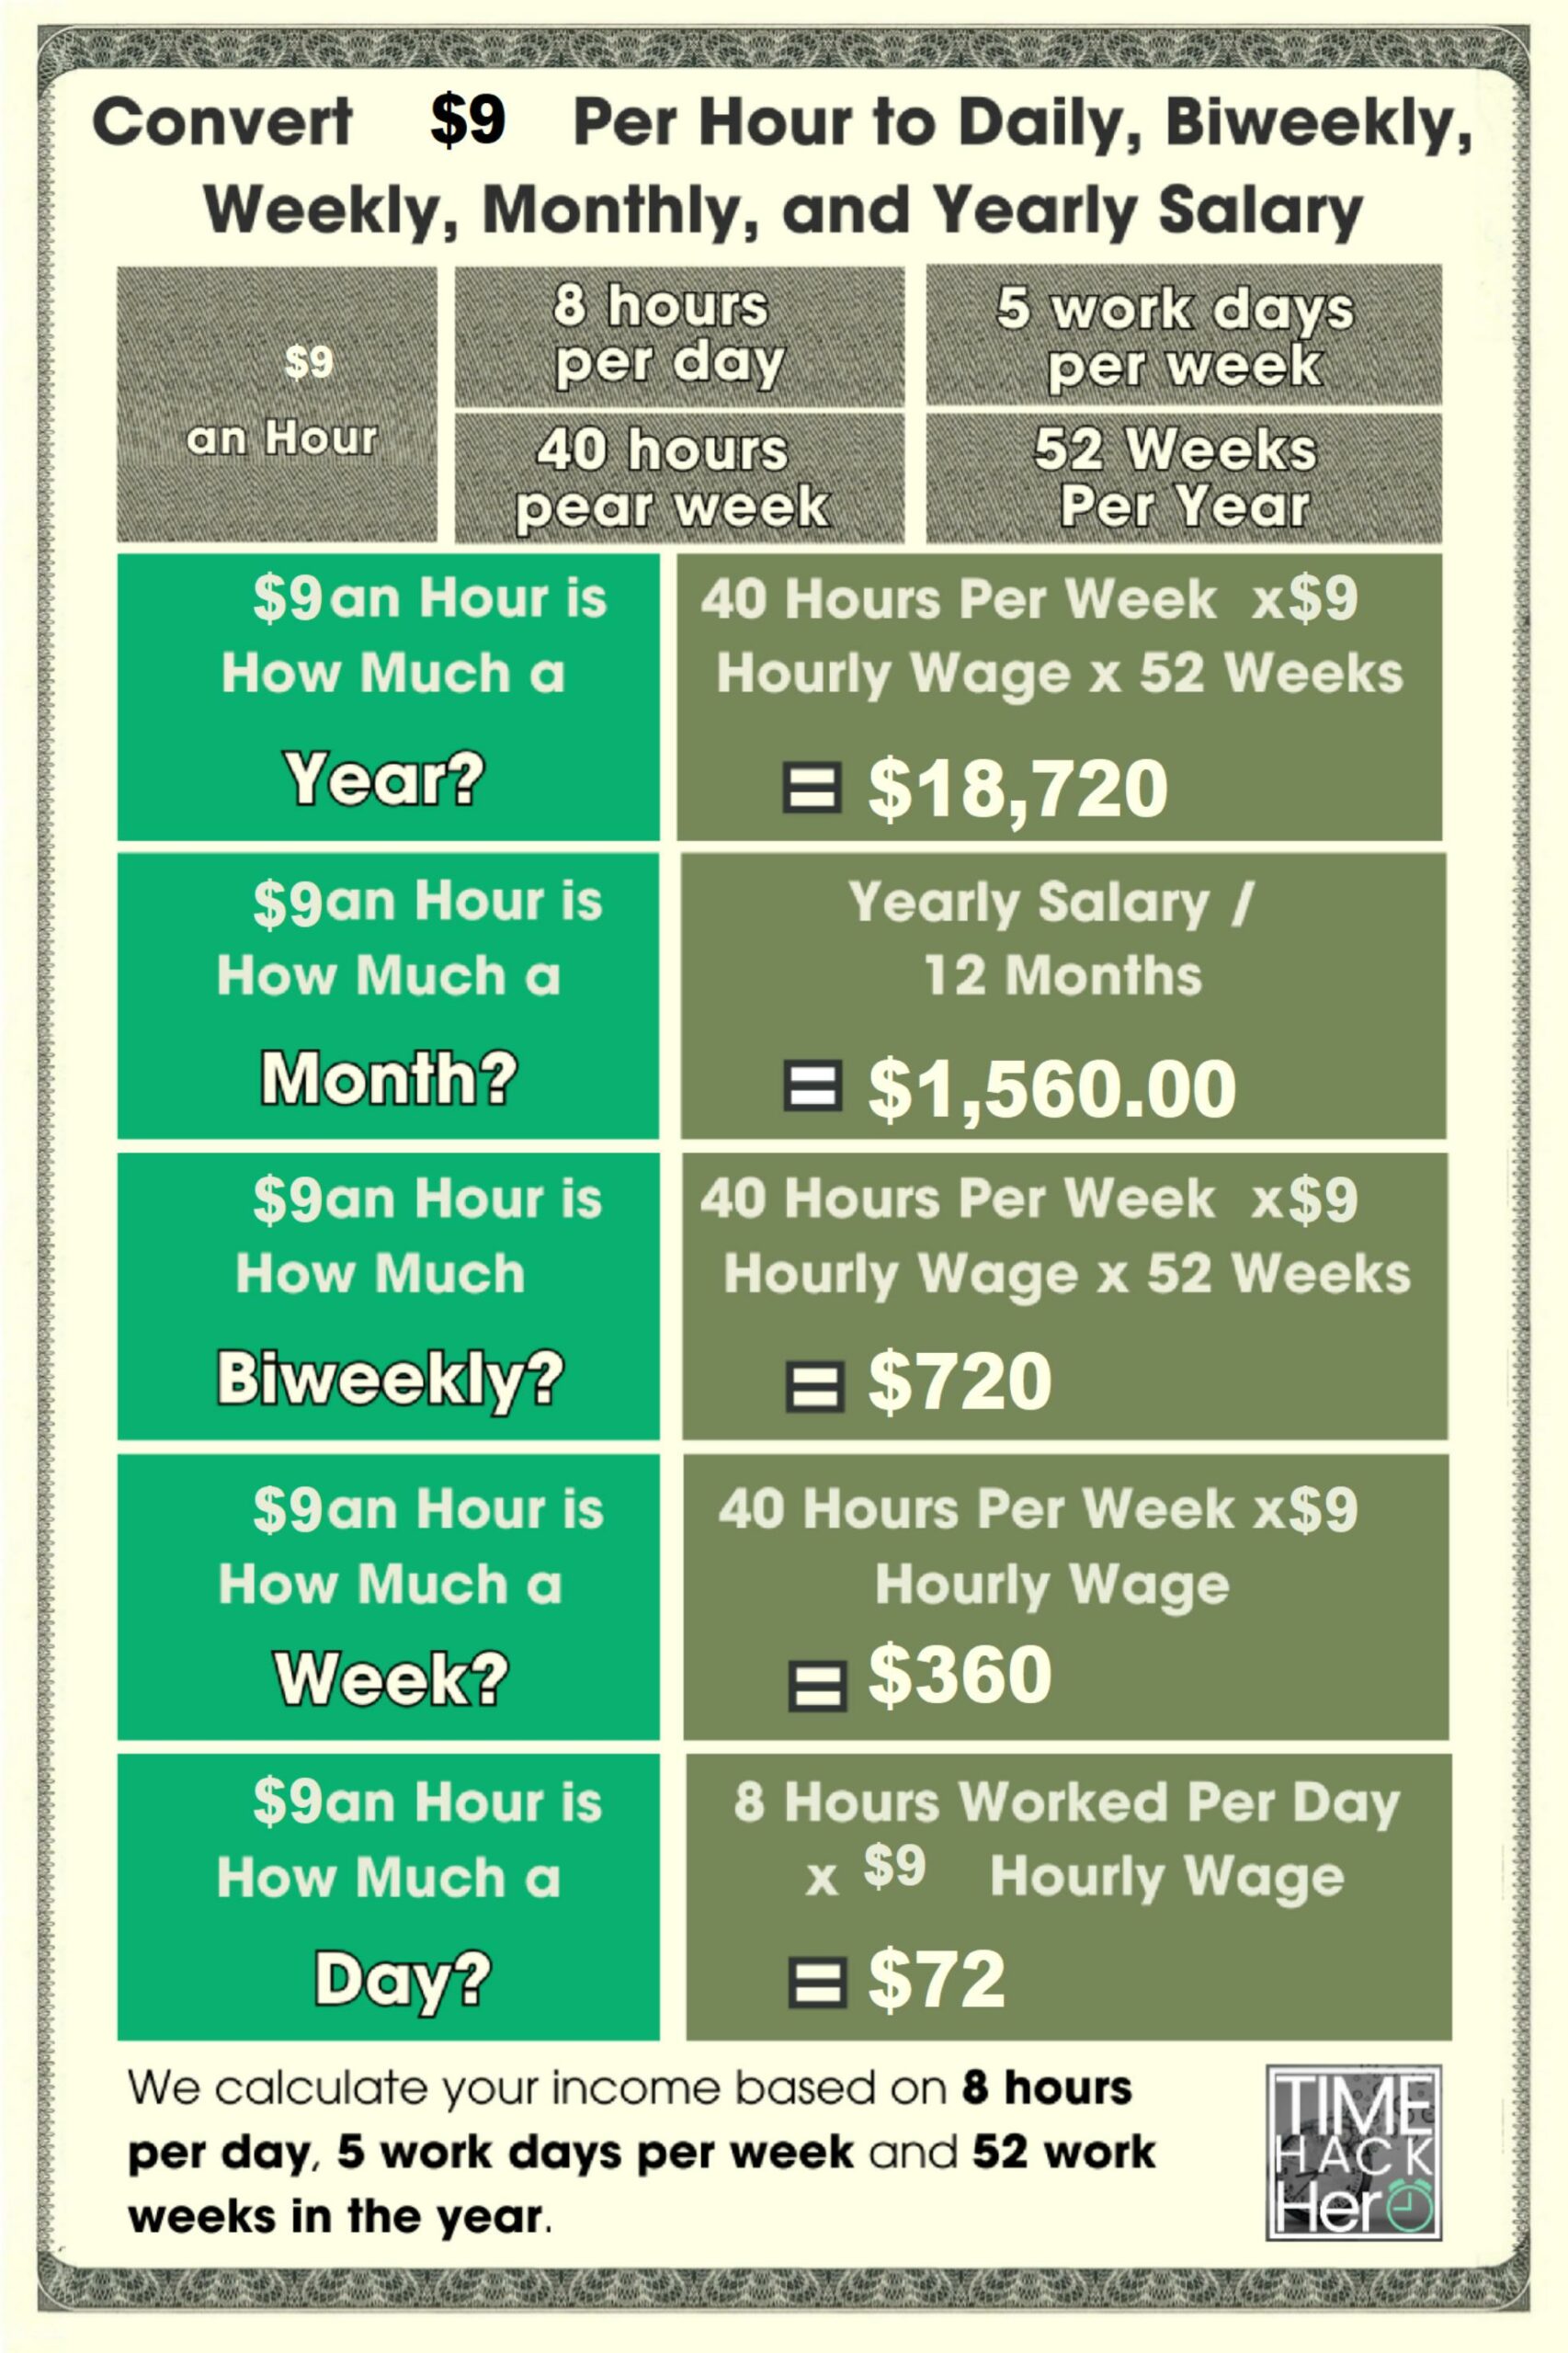 Convert $9 Per Hour to Weekly, Monthly, and Yearly Salary